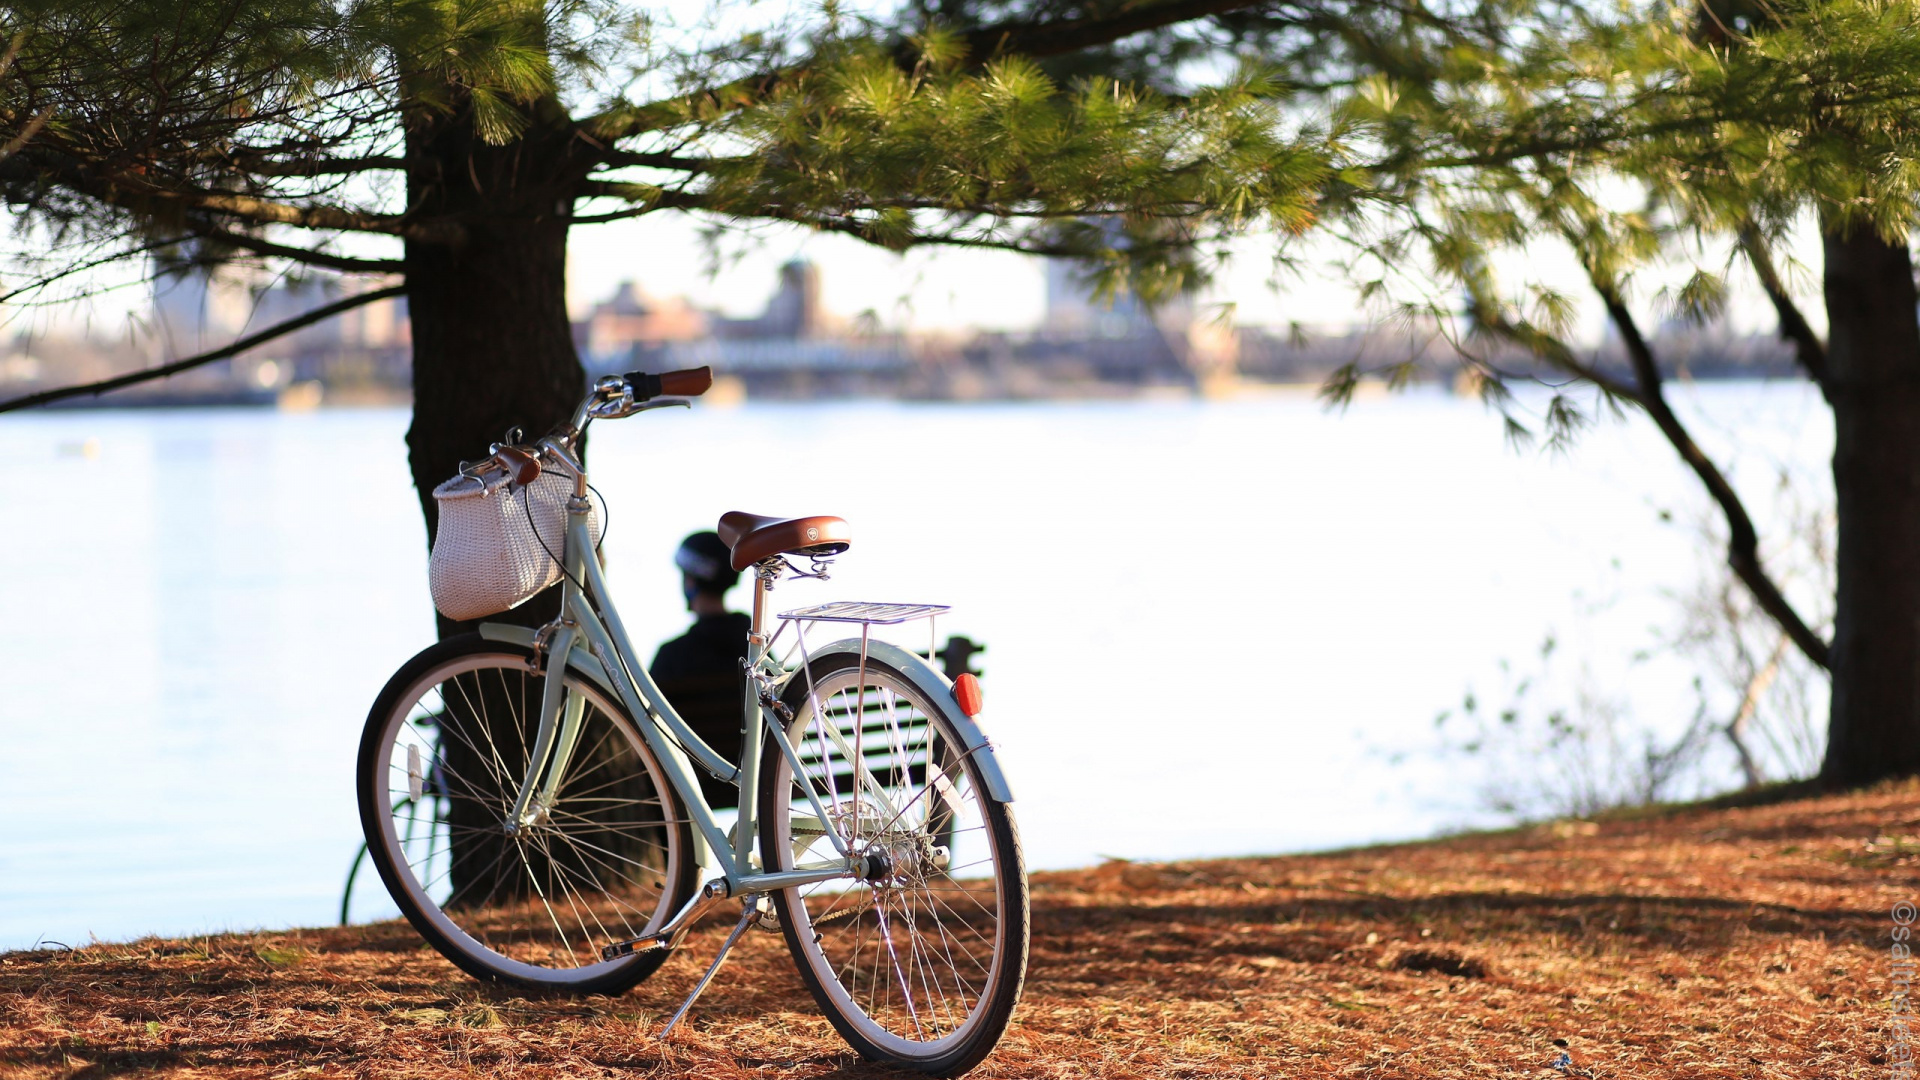 White City Bike on Brown Sand Near Body of Water During Daytime. Wallpaper in 1920x1080 Resolution